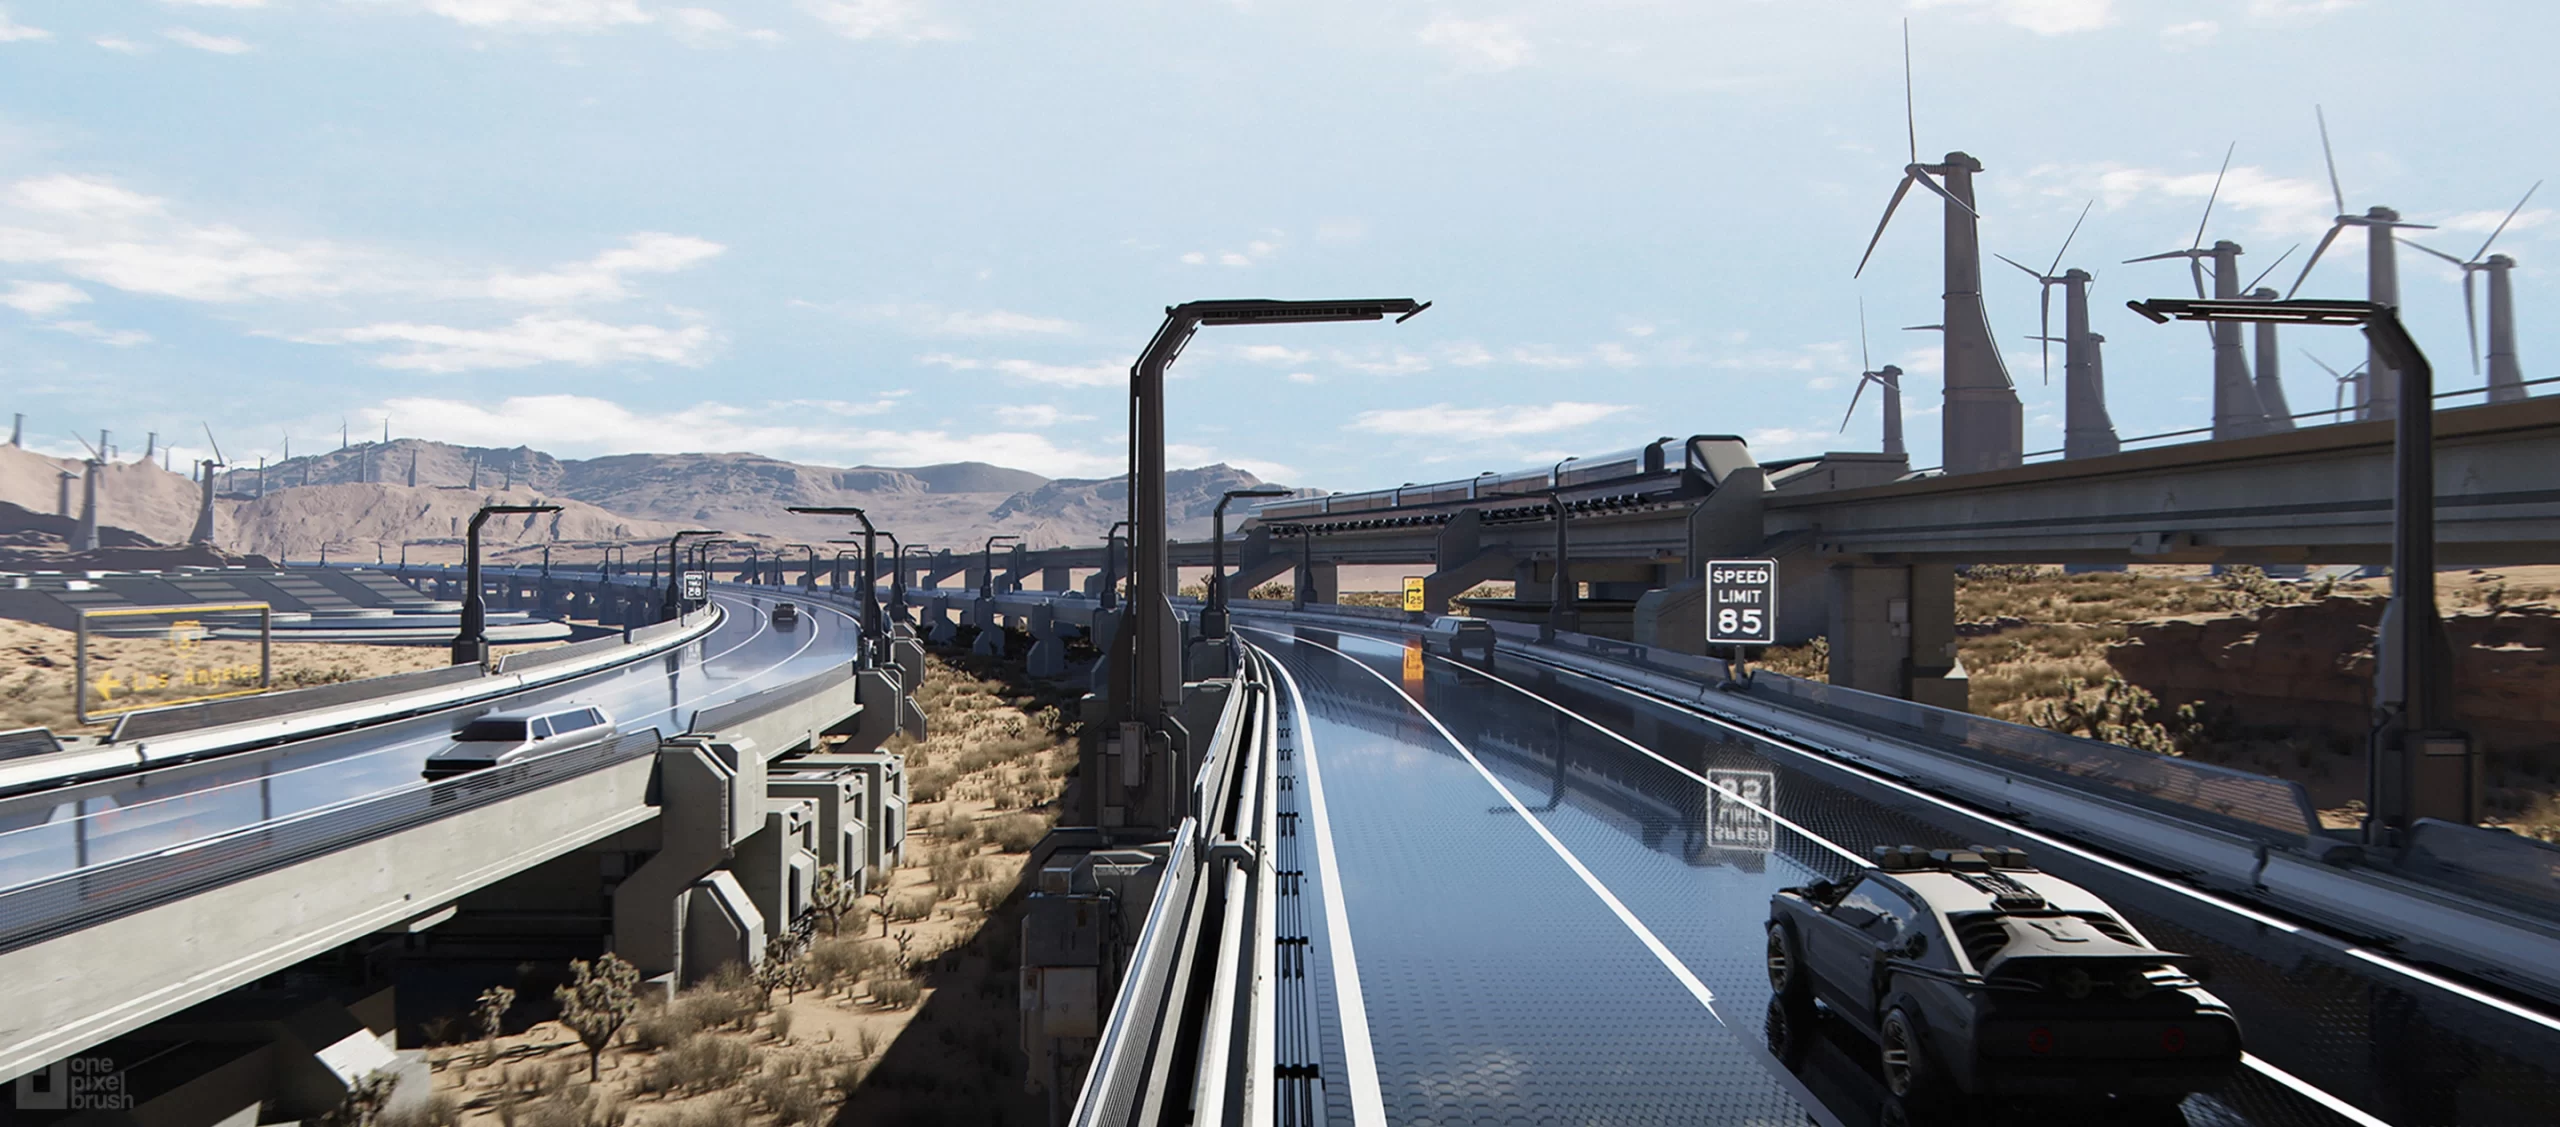 nvidia-video-game-concept-art-highway-race-environment-2880x1268